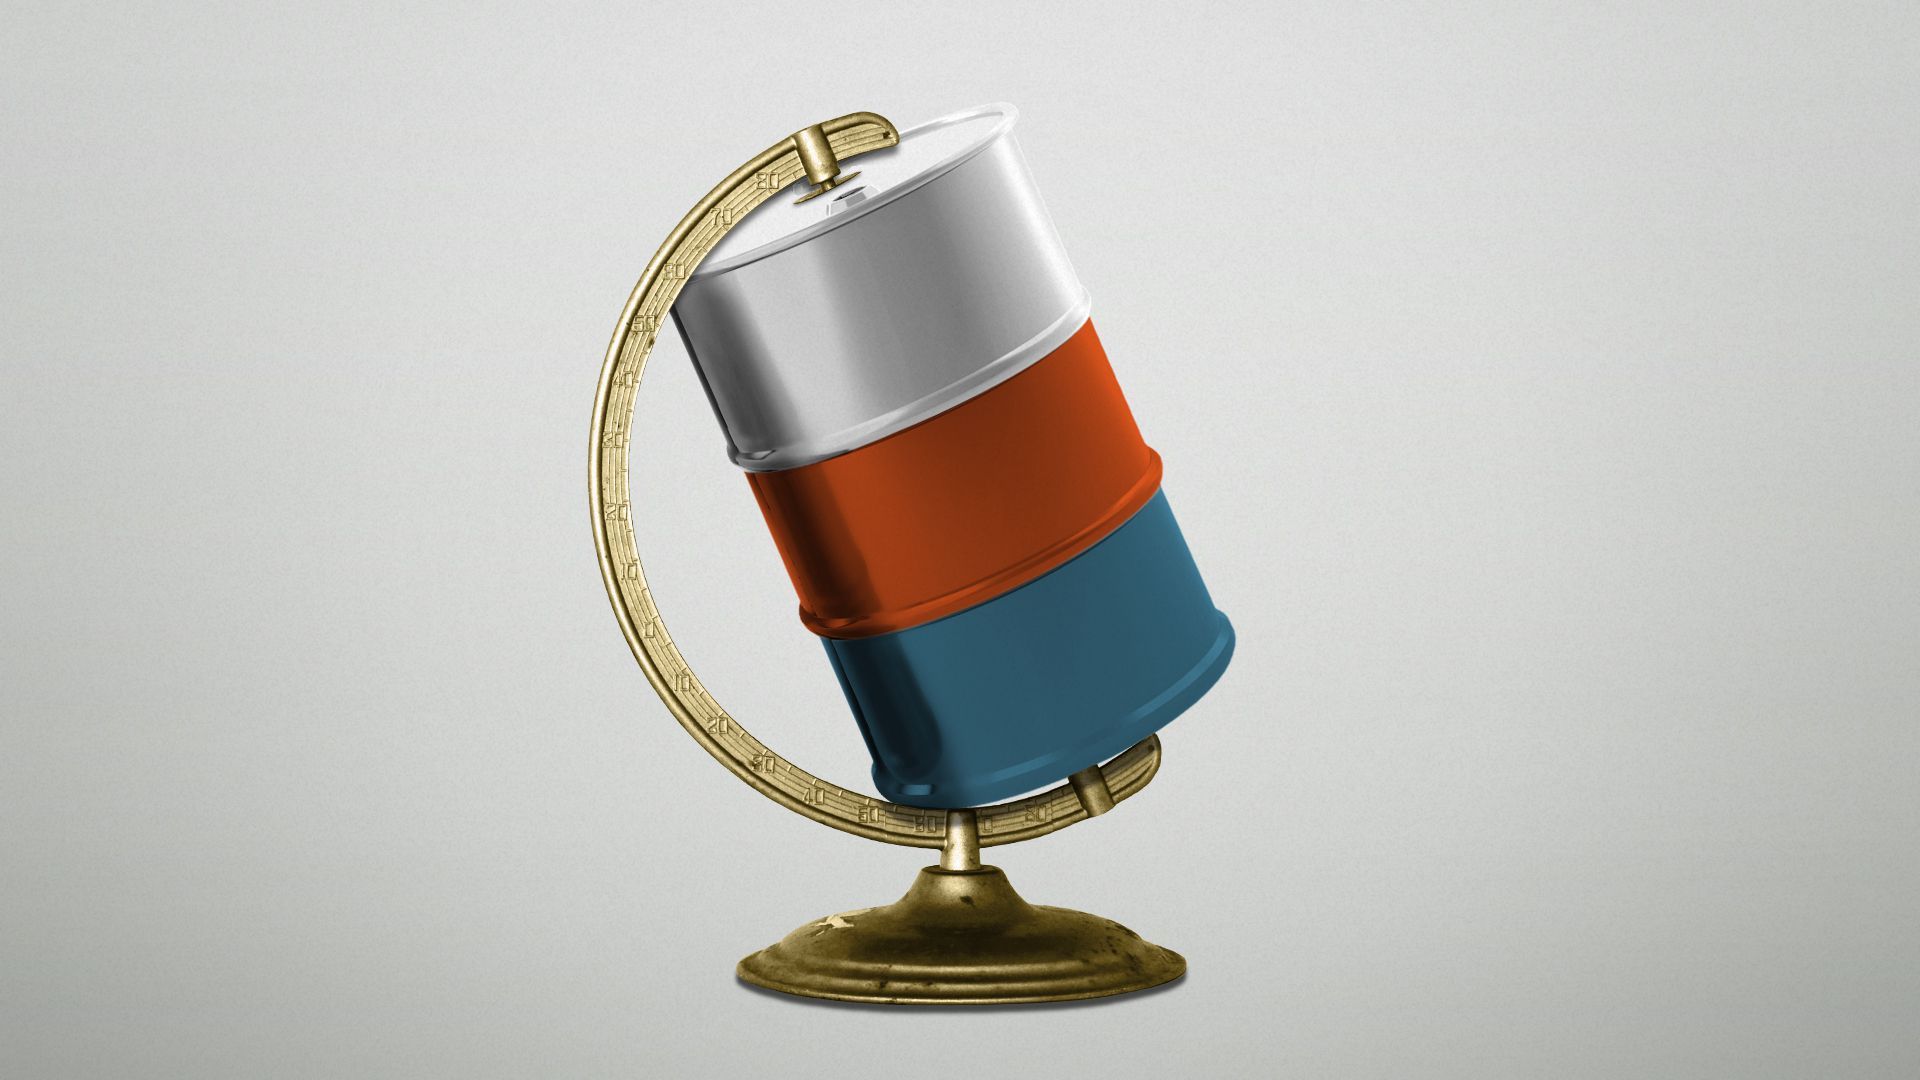 Illustration of an oil drum in Russian flag colors being held by a globe stand.